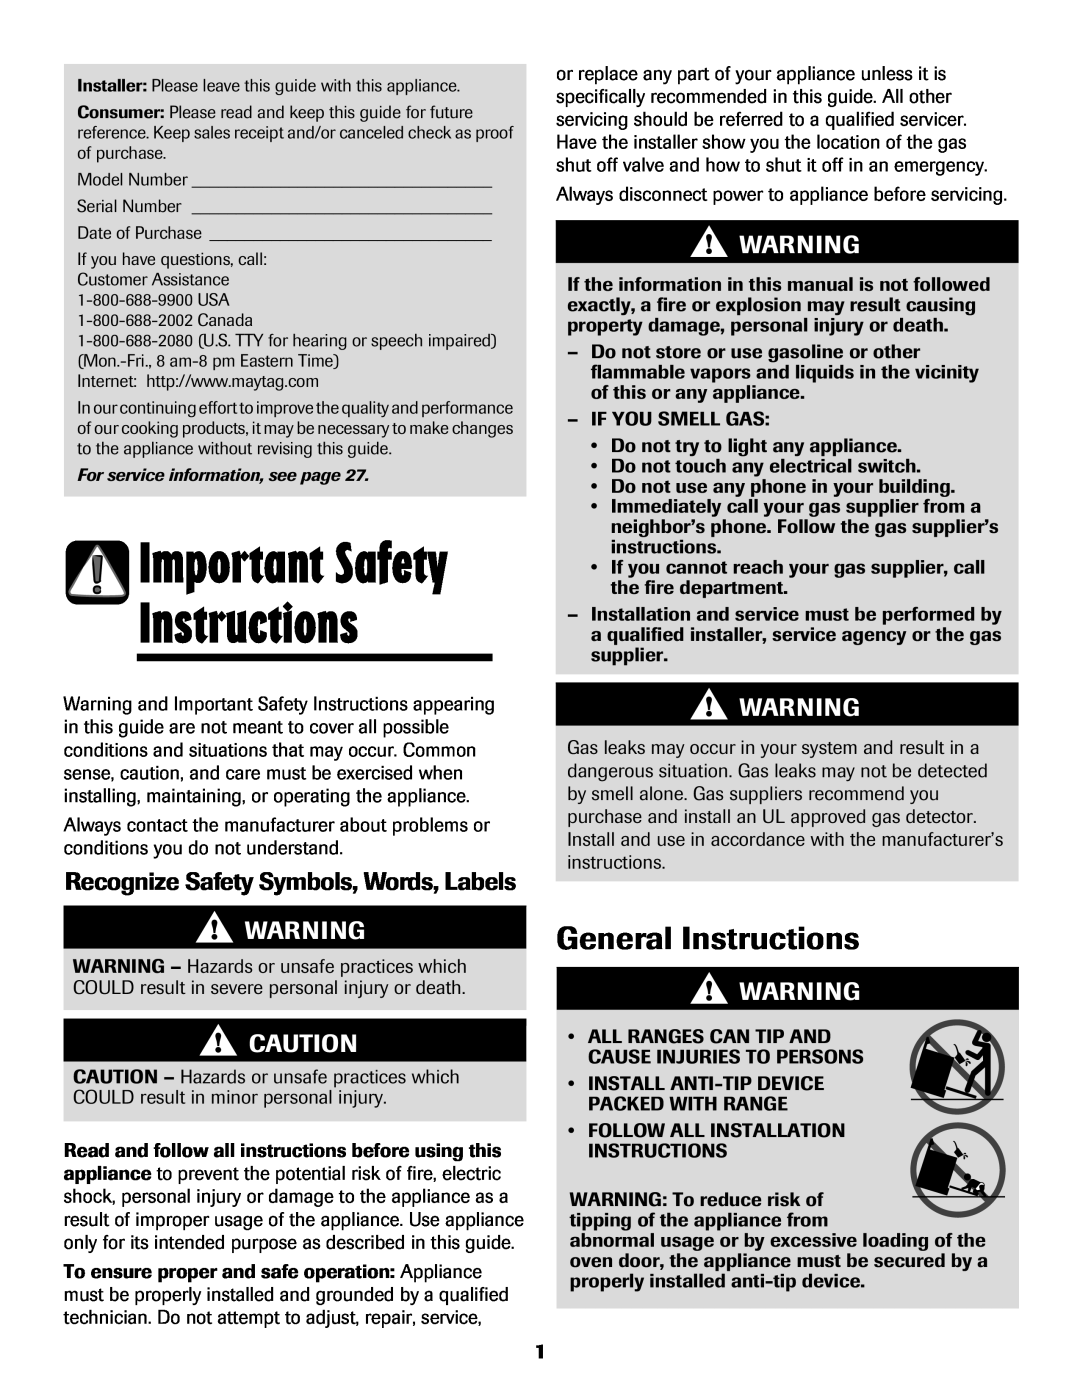 Maytag MGS5875BDW Important Safety, General Instructions, Recognize Safety Symbols, Words, Labels 